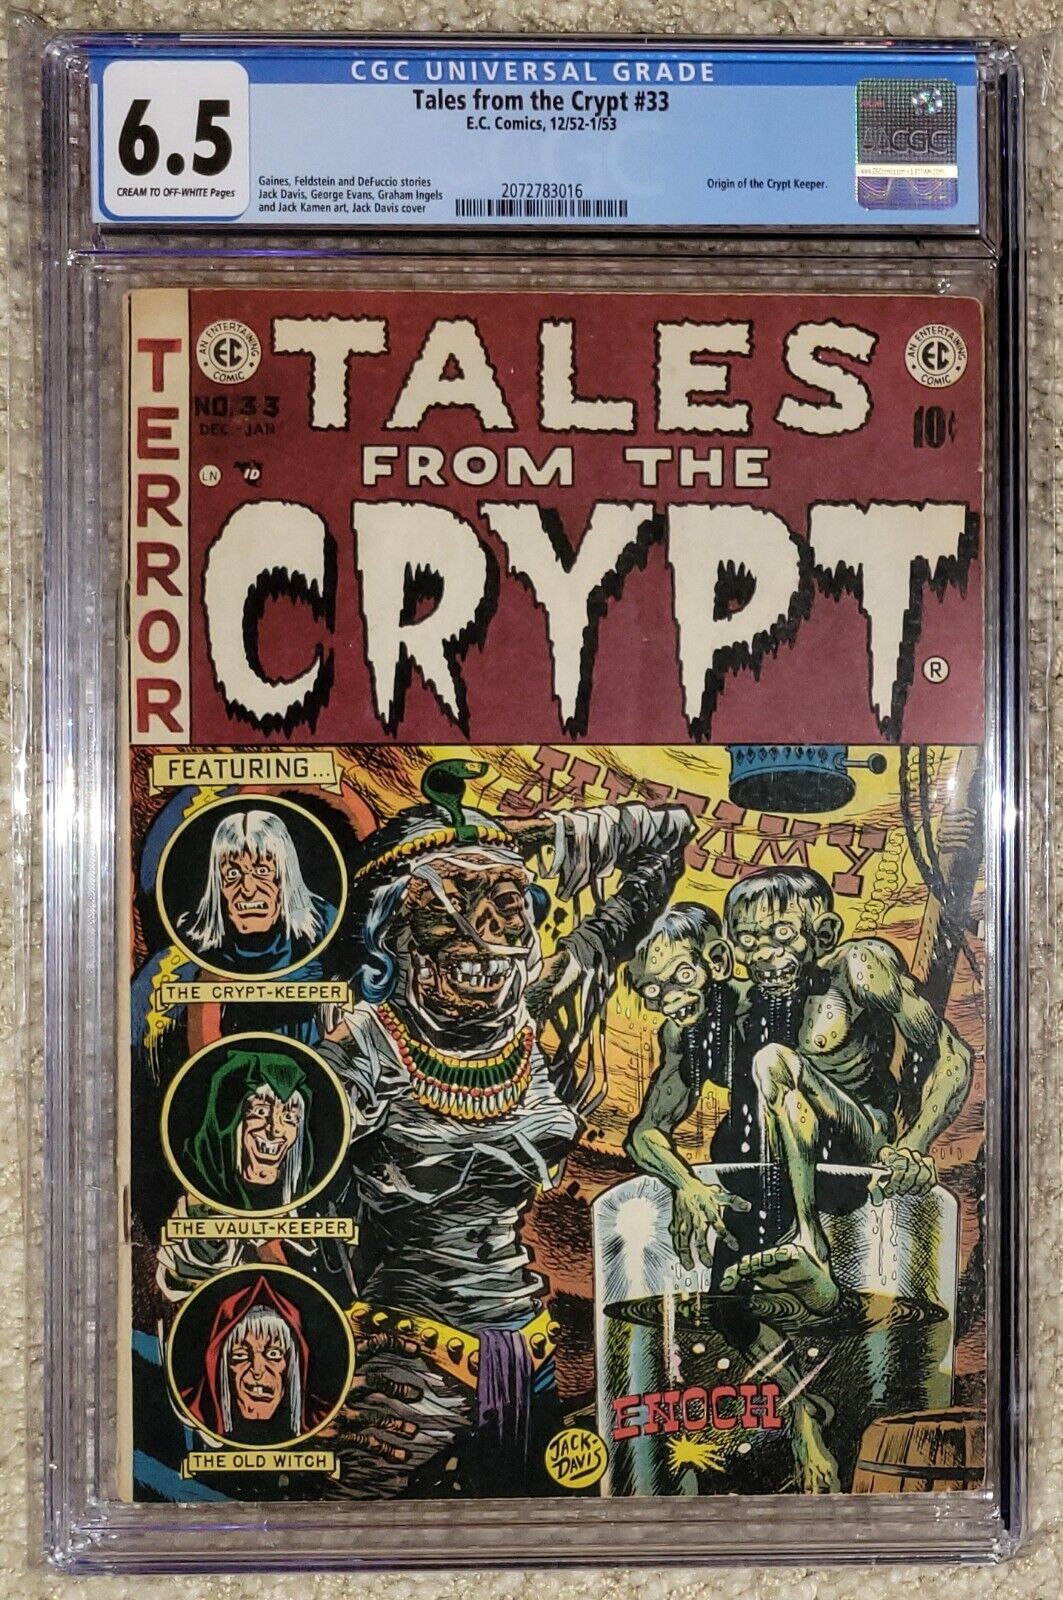 Tales from the Crypt #33 1953 CGC 6.5 - Origin of the Crypt Keeper.